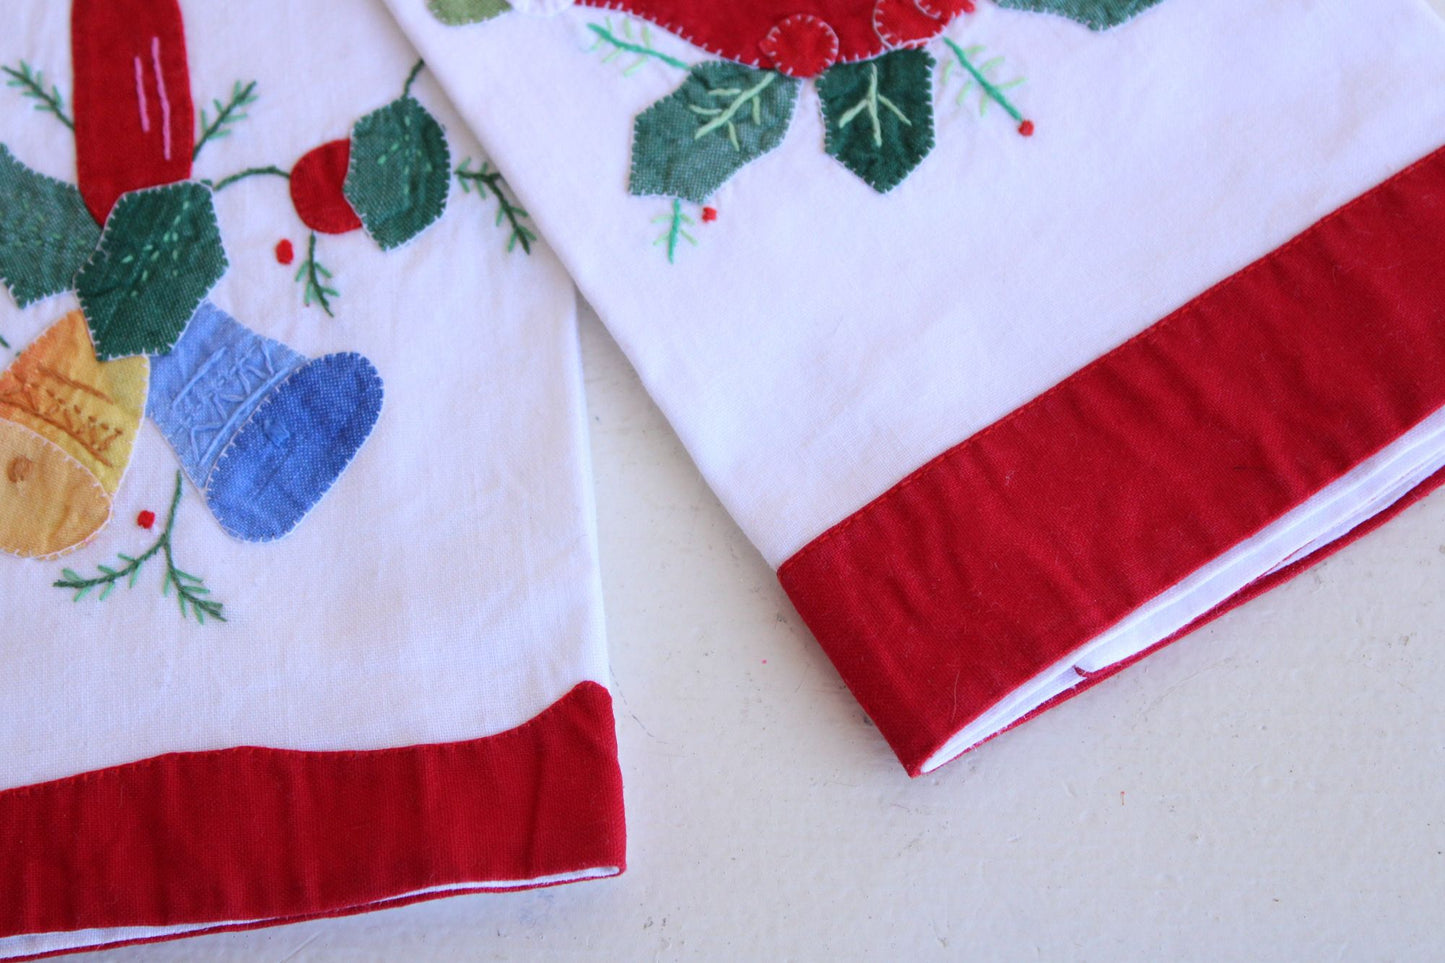 Vintage 1980s Christmas Holiday Towels with Santa Claus and Candle Appliques